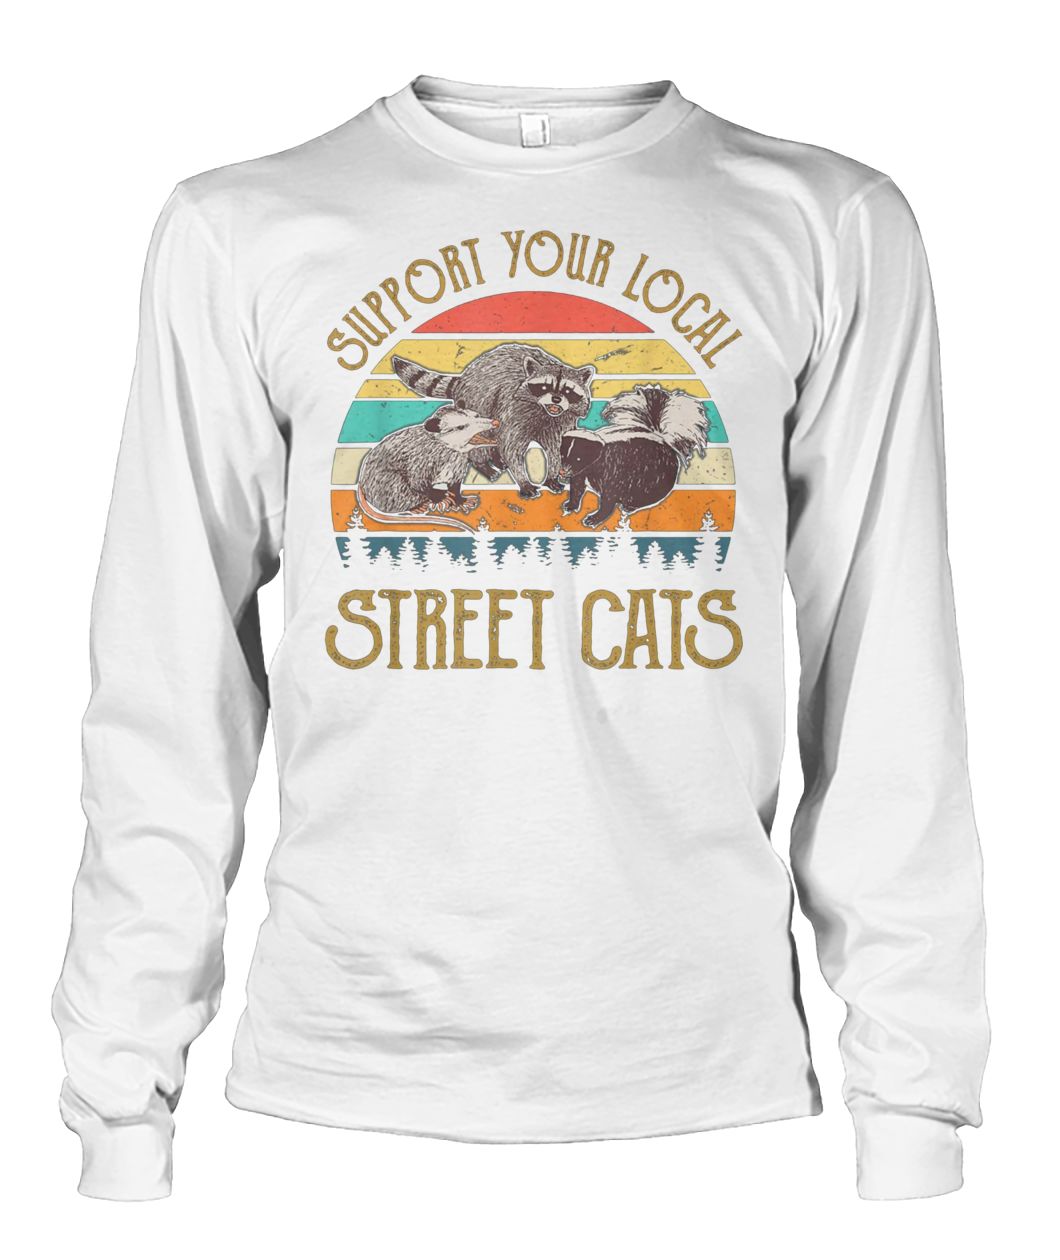 Vintage support your local street cats unisex long sleeve